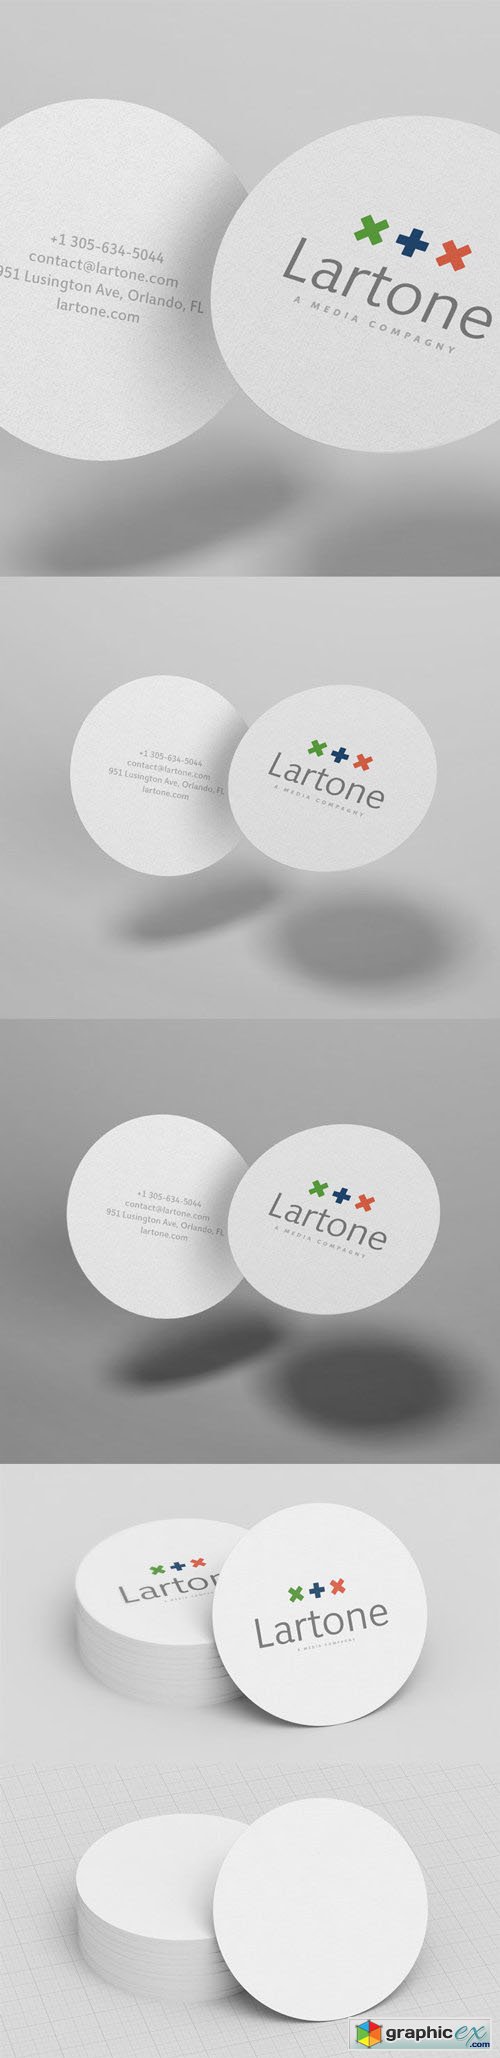  Business Card Mockup - Gray And Corporate